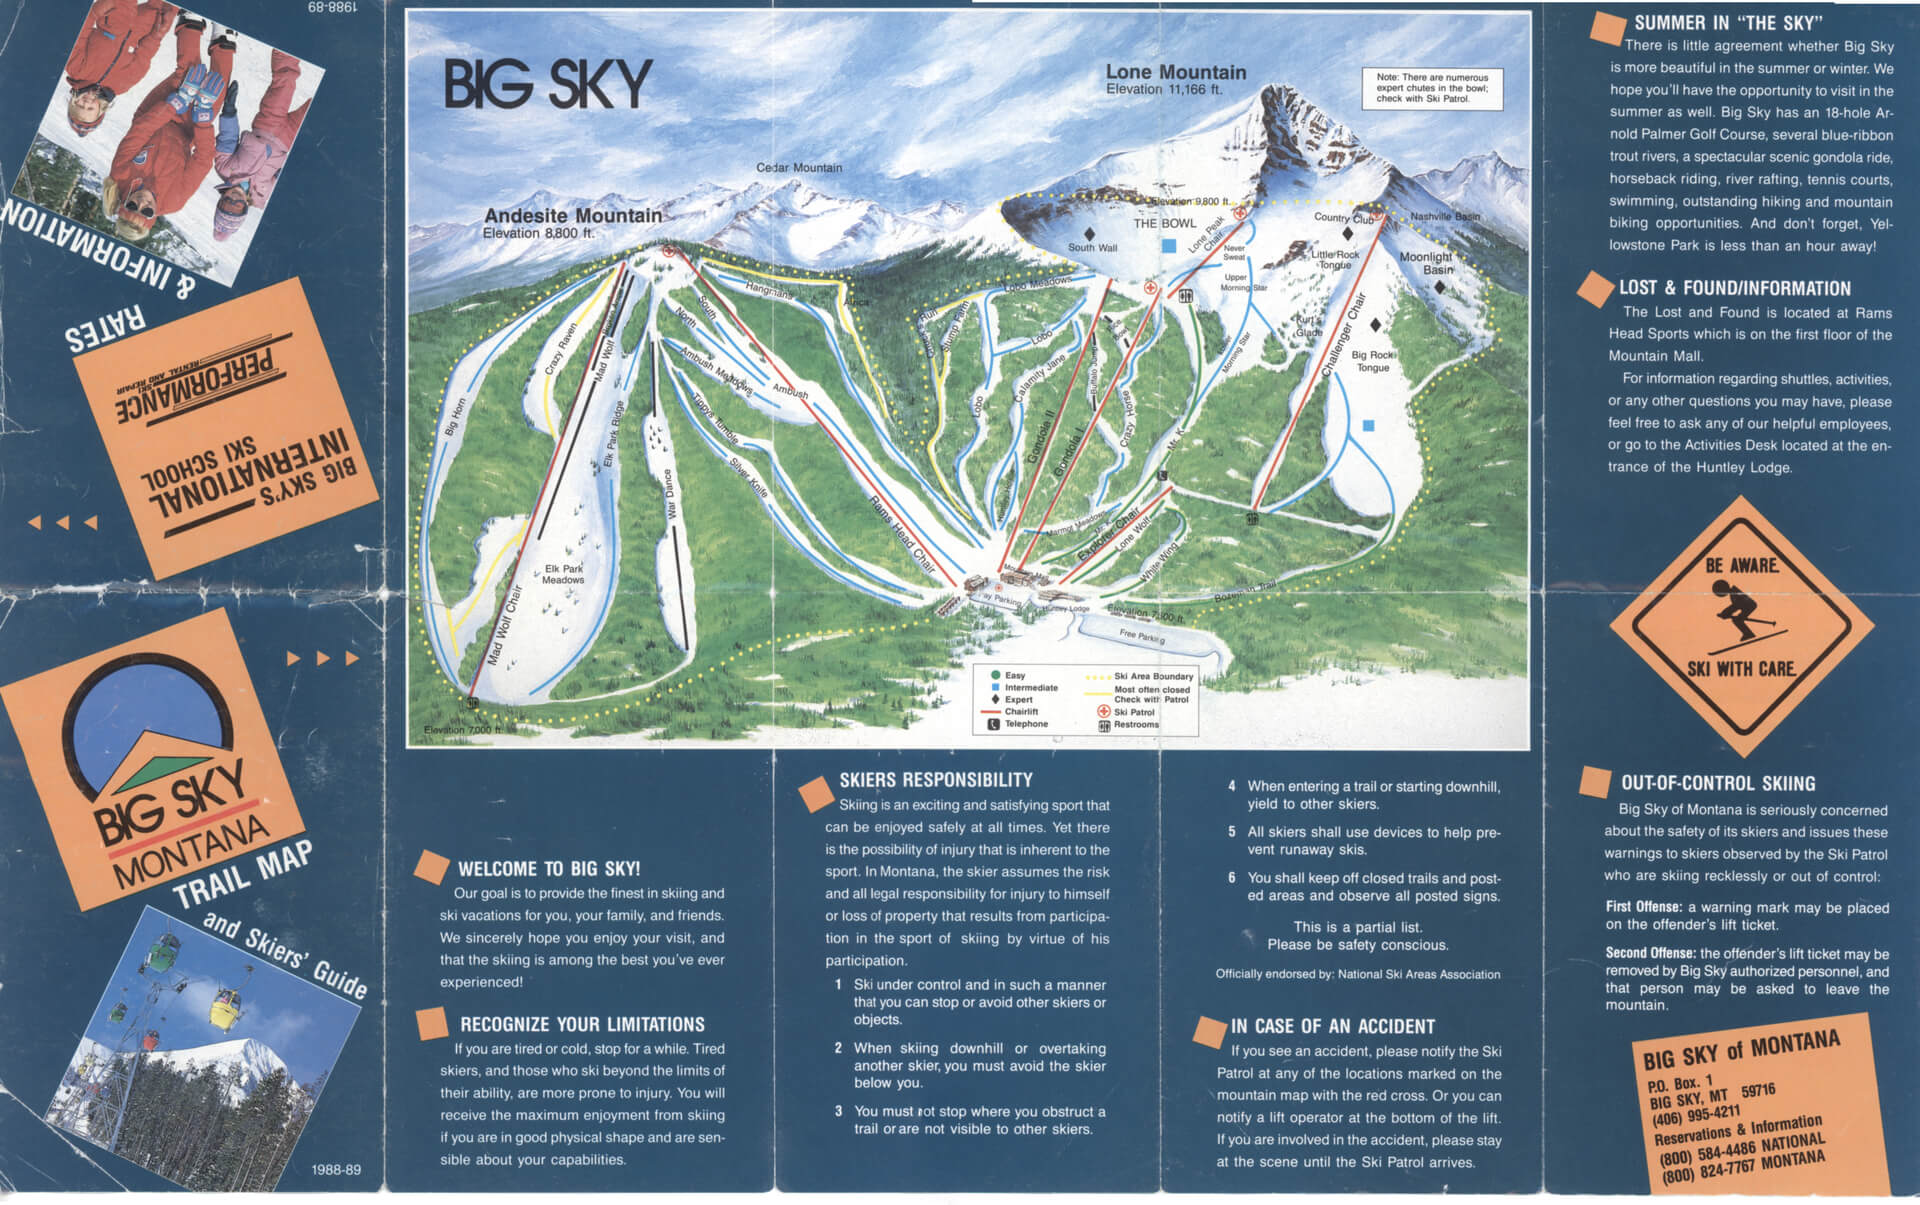 Big Sky Trail Map From 1998